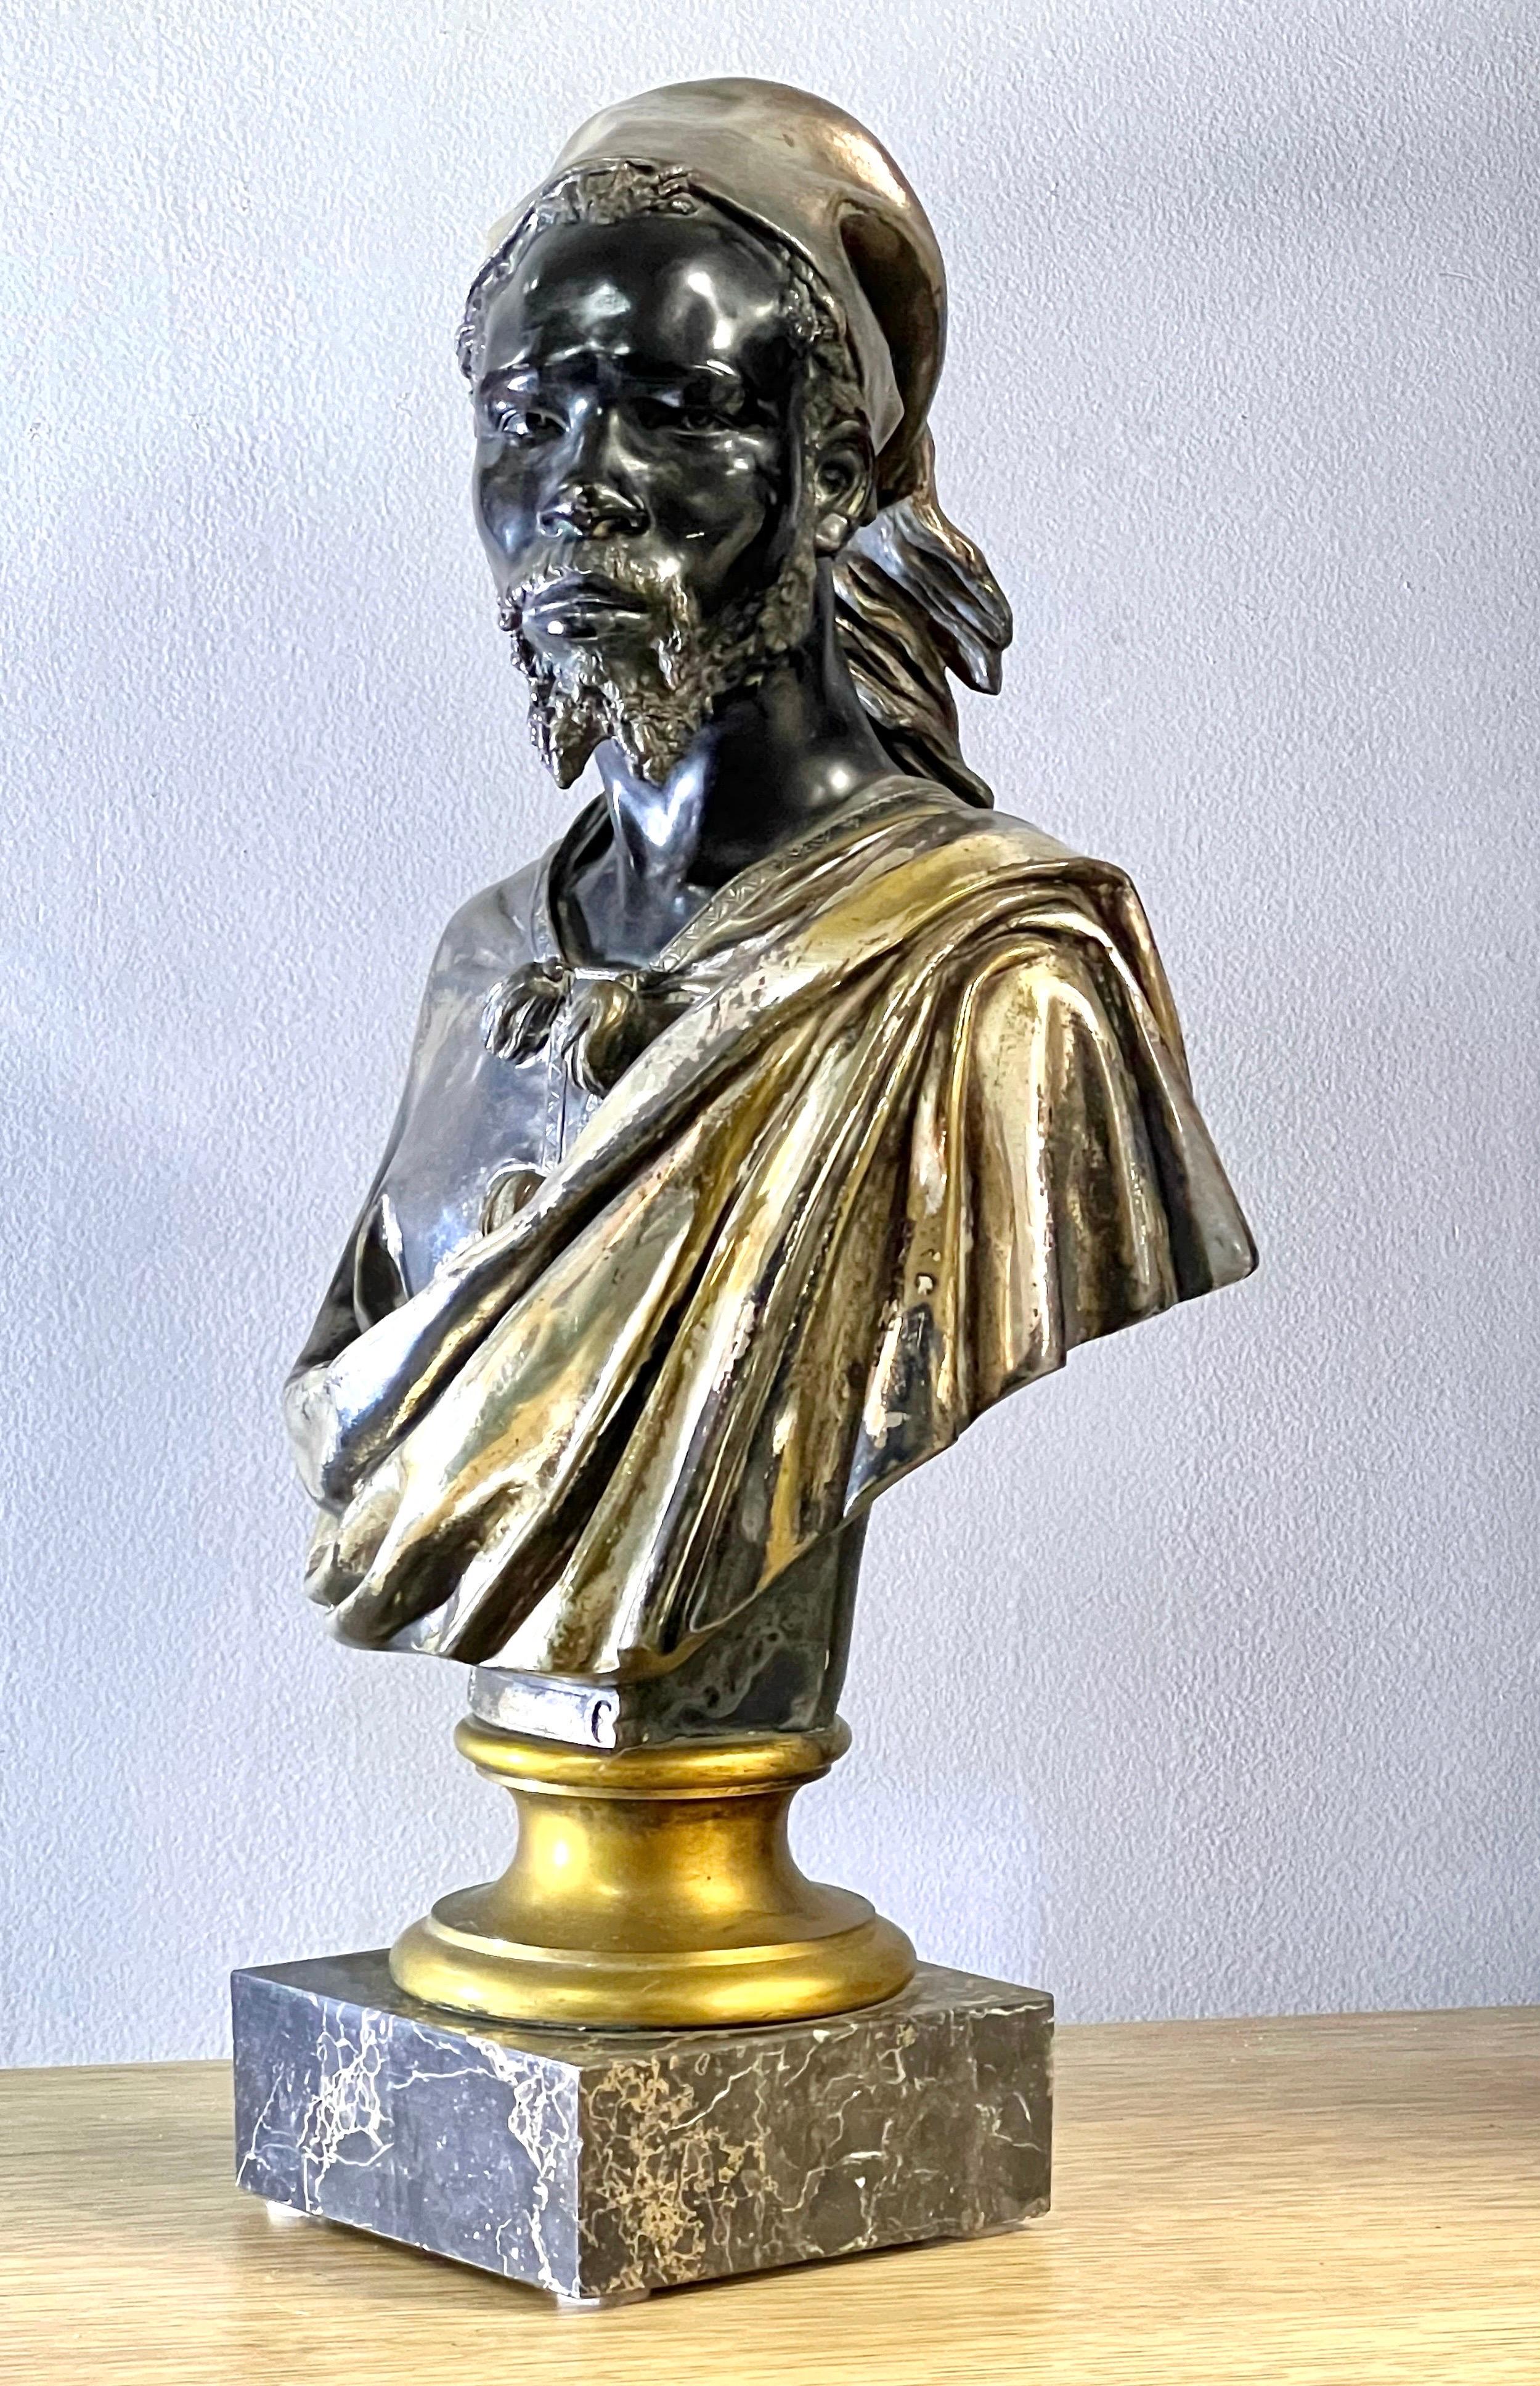 Bronze Sculpture by Charles Cordier. 
Signed Cordier on the edge of tunic. 
Base is about 2” tall. Height provided includes marble base. 
